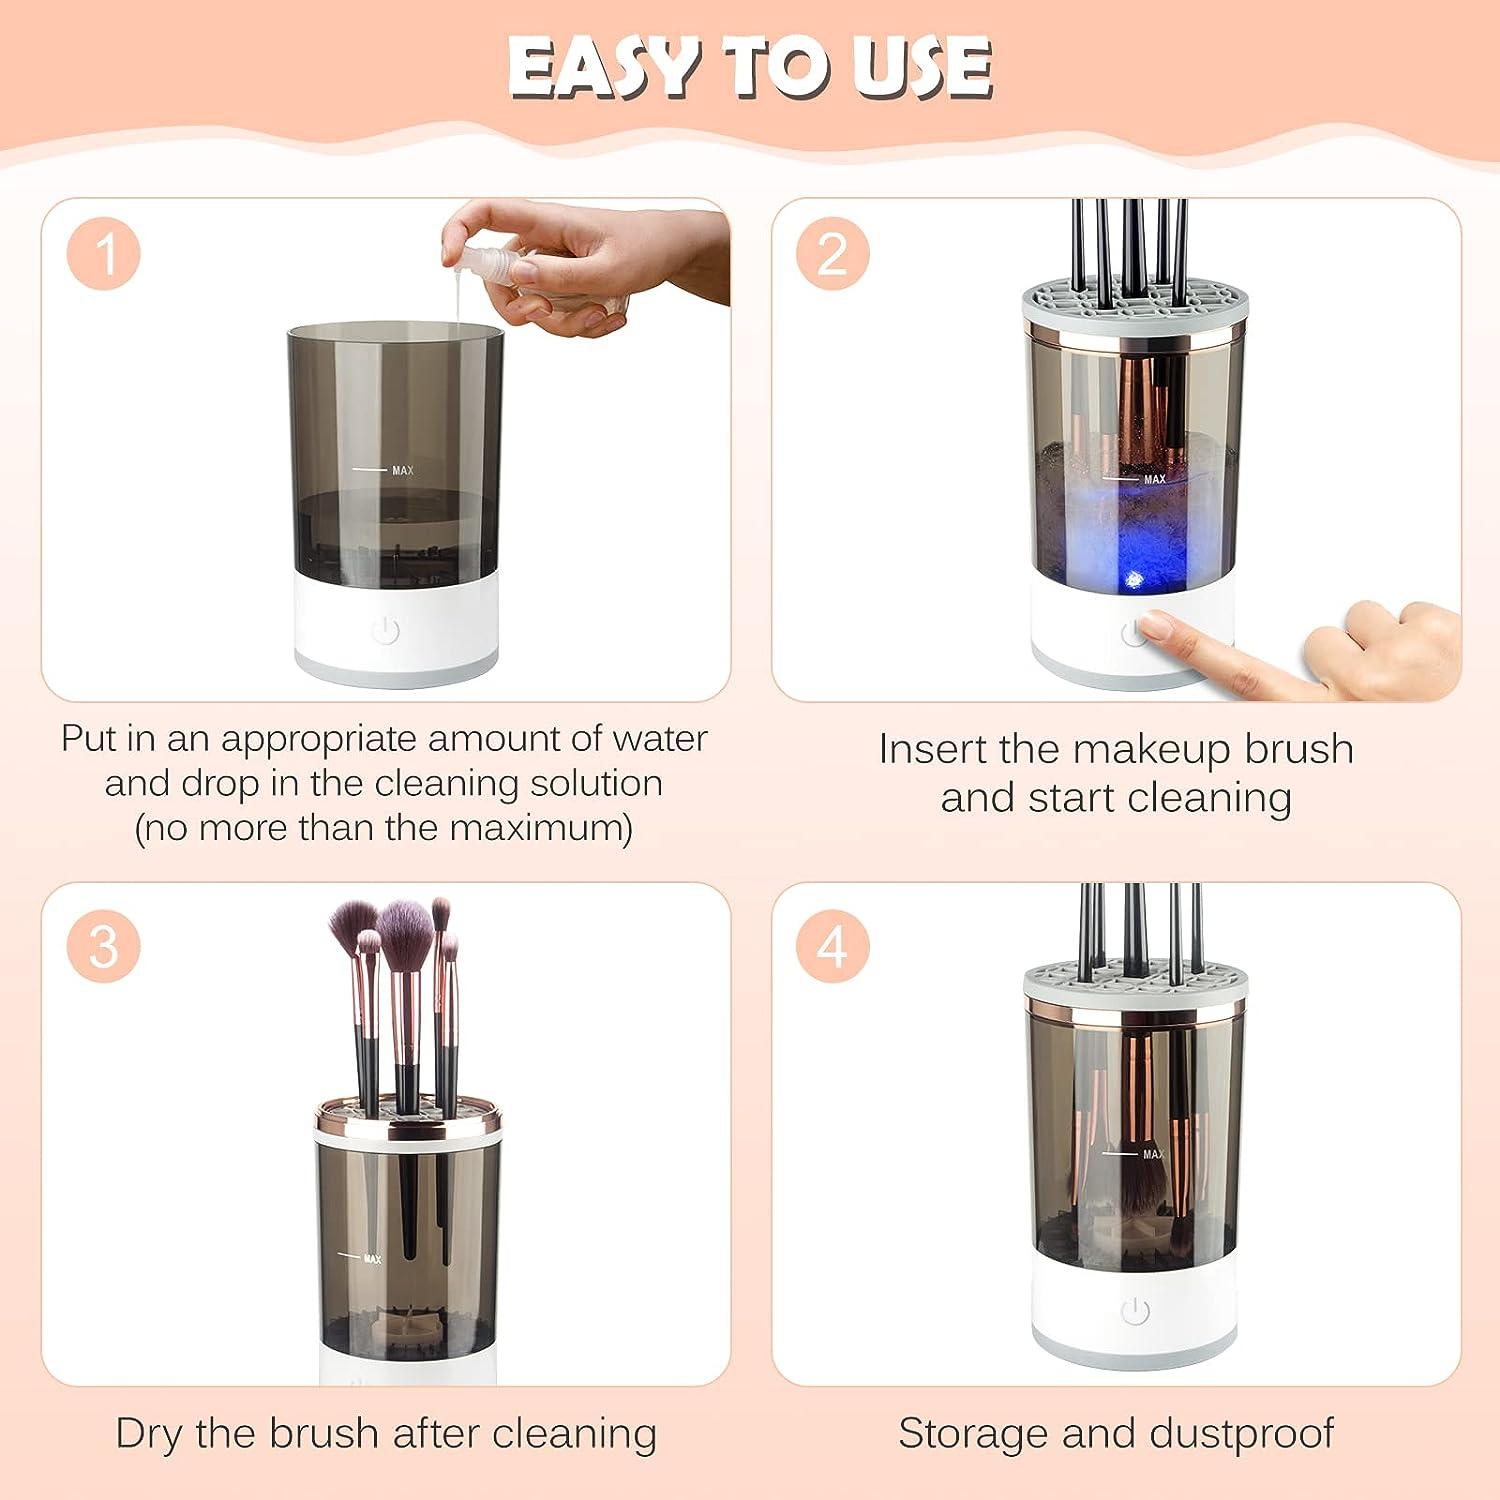  Electric Makeup Brush Cleaner, Makeup Brush Cleaner Machine  with Brush Clean Mat, Automatic Cosmetic Brush Cleaner Makeup Brush Tools  for All Size Beauty Makeup Brushes Set, Gift for Women Wife Friend 